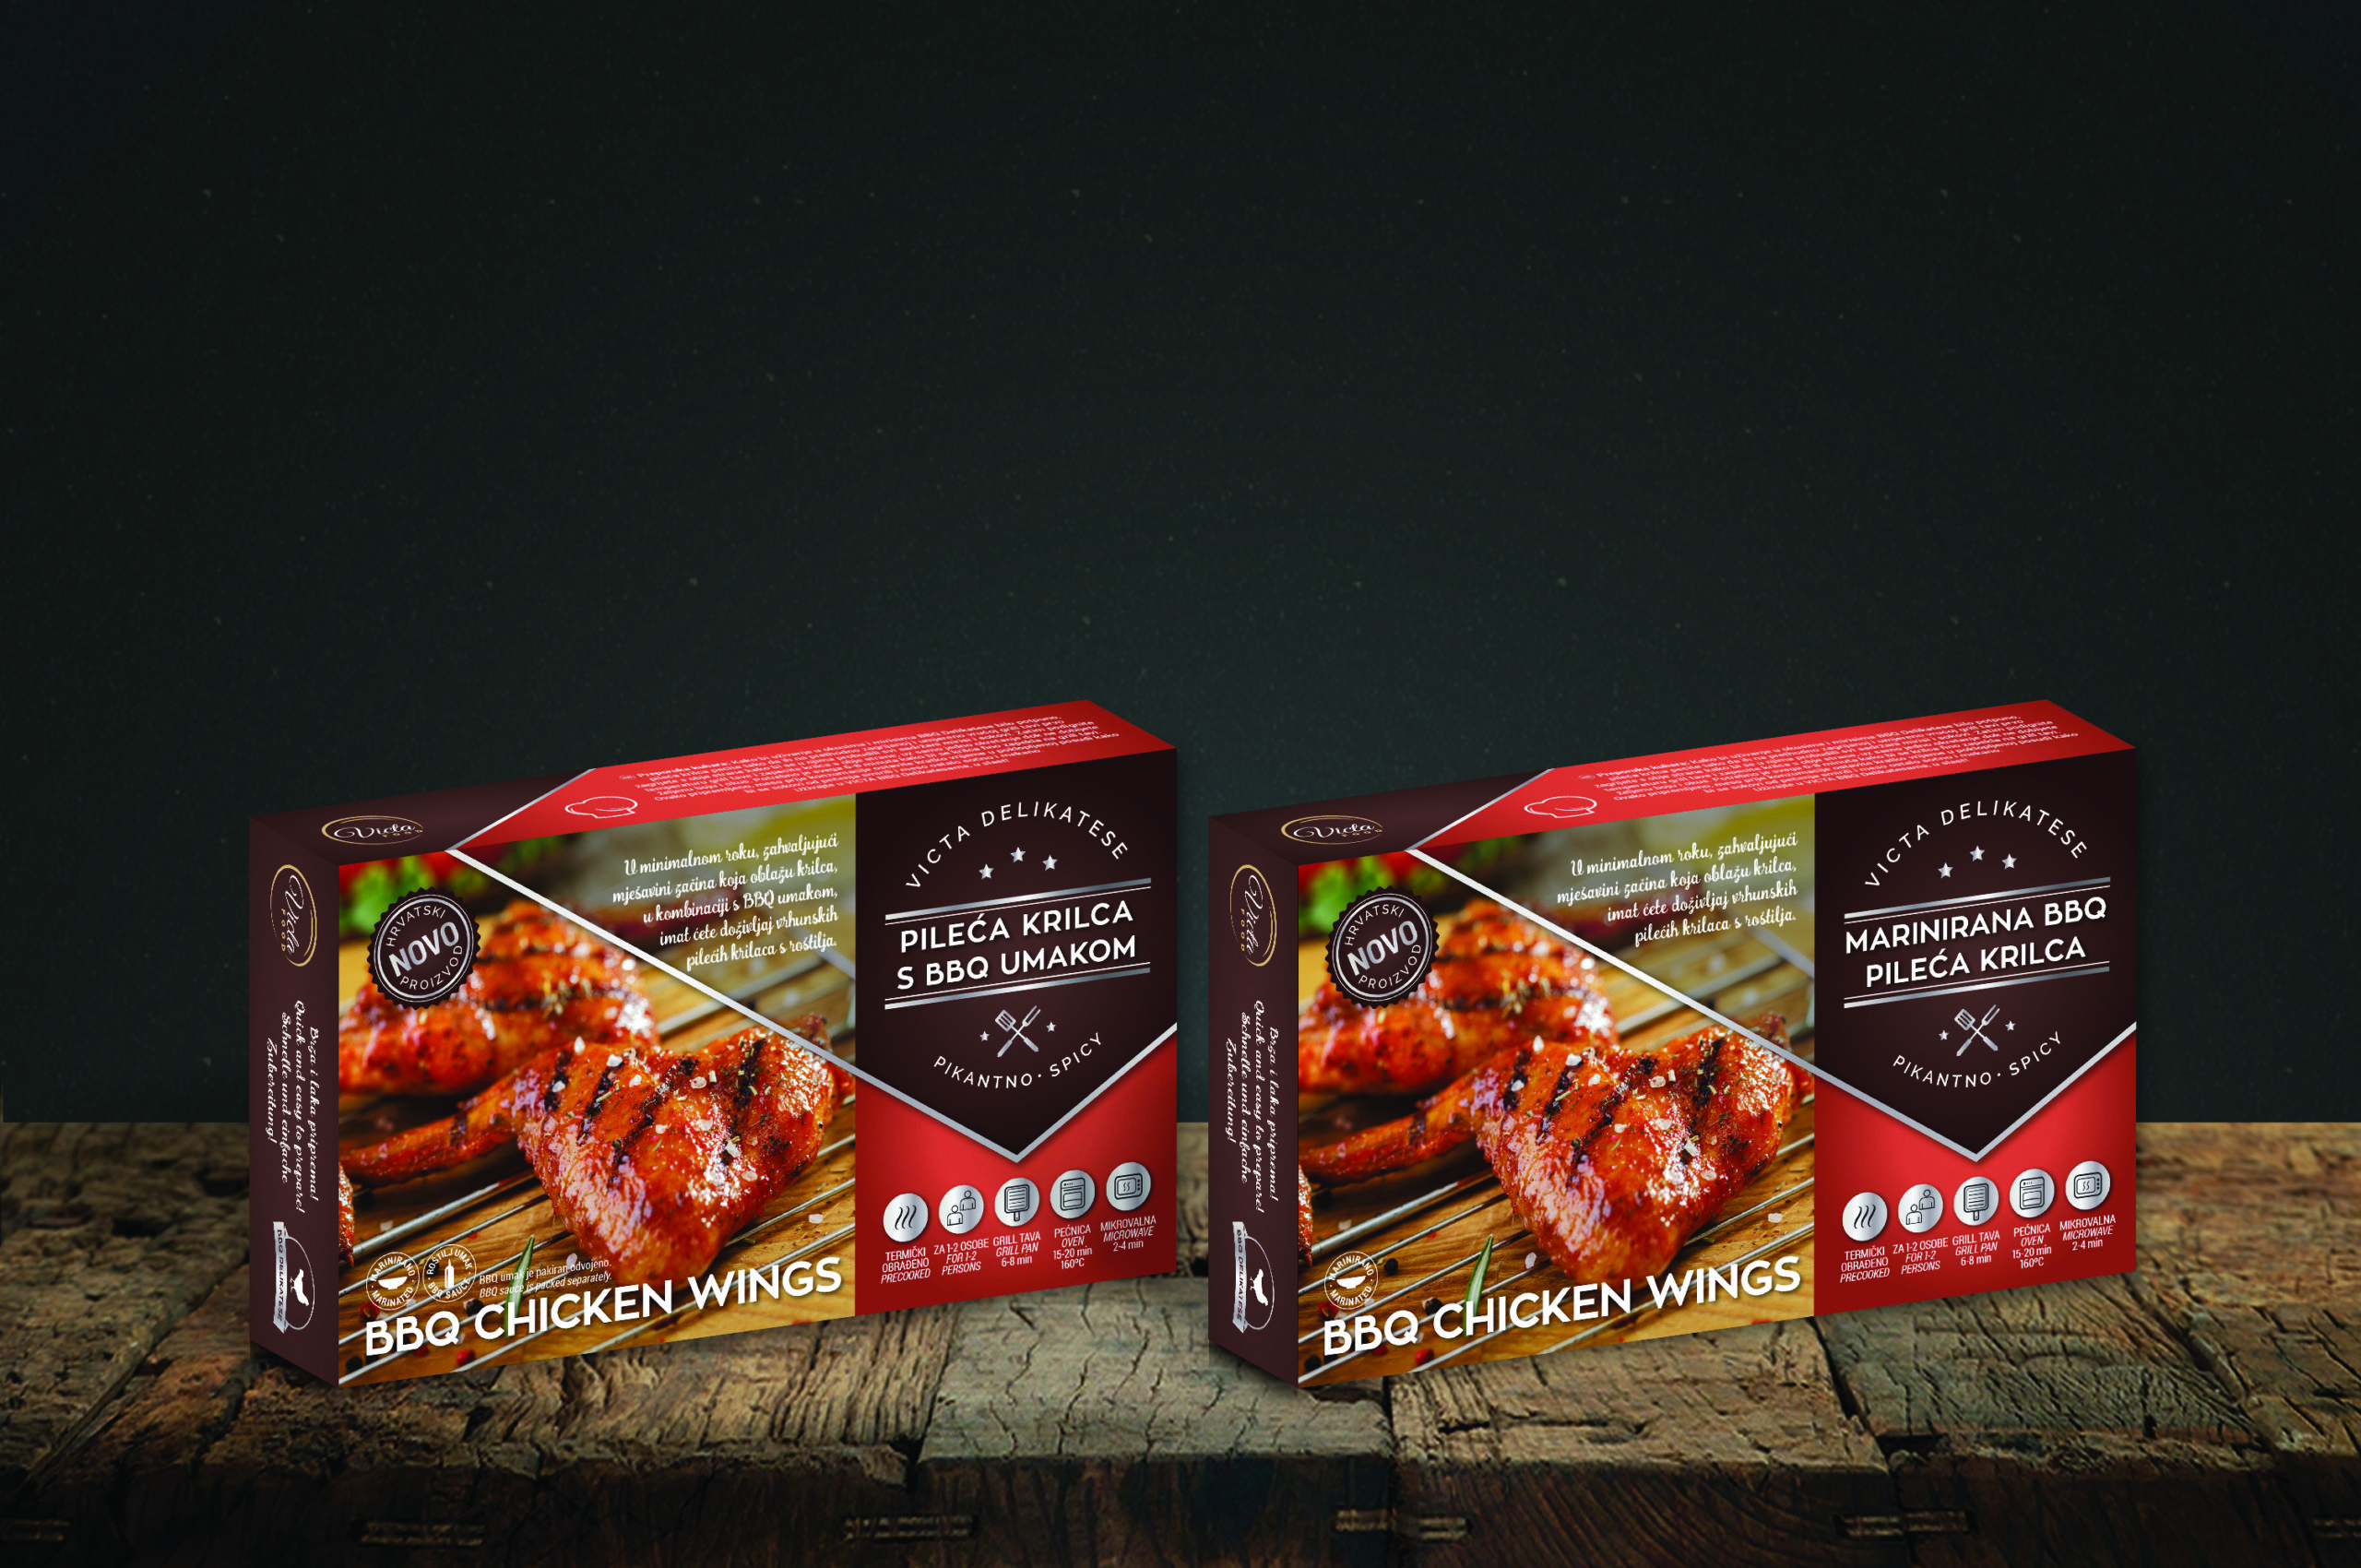 Packaging design for Victa Food company's meat products. The picture shows two product packages on a wooden base with a dark gray background. The design is red with dark brown parts on which there is white text. There is also a picture of the product on the packaging.